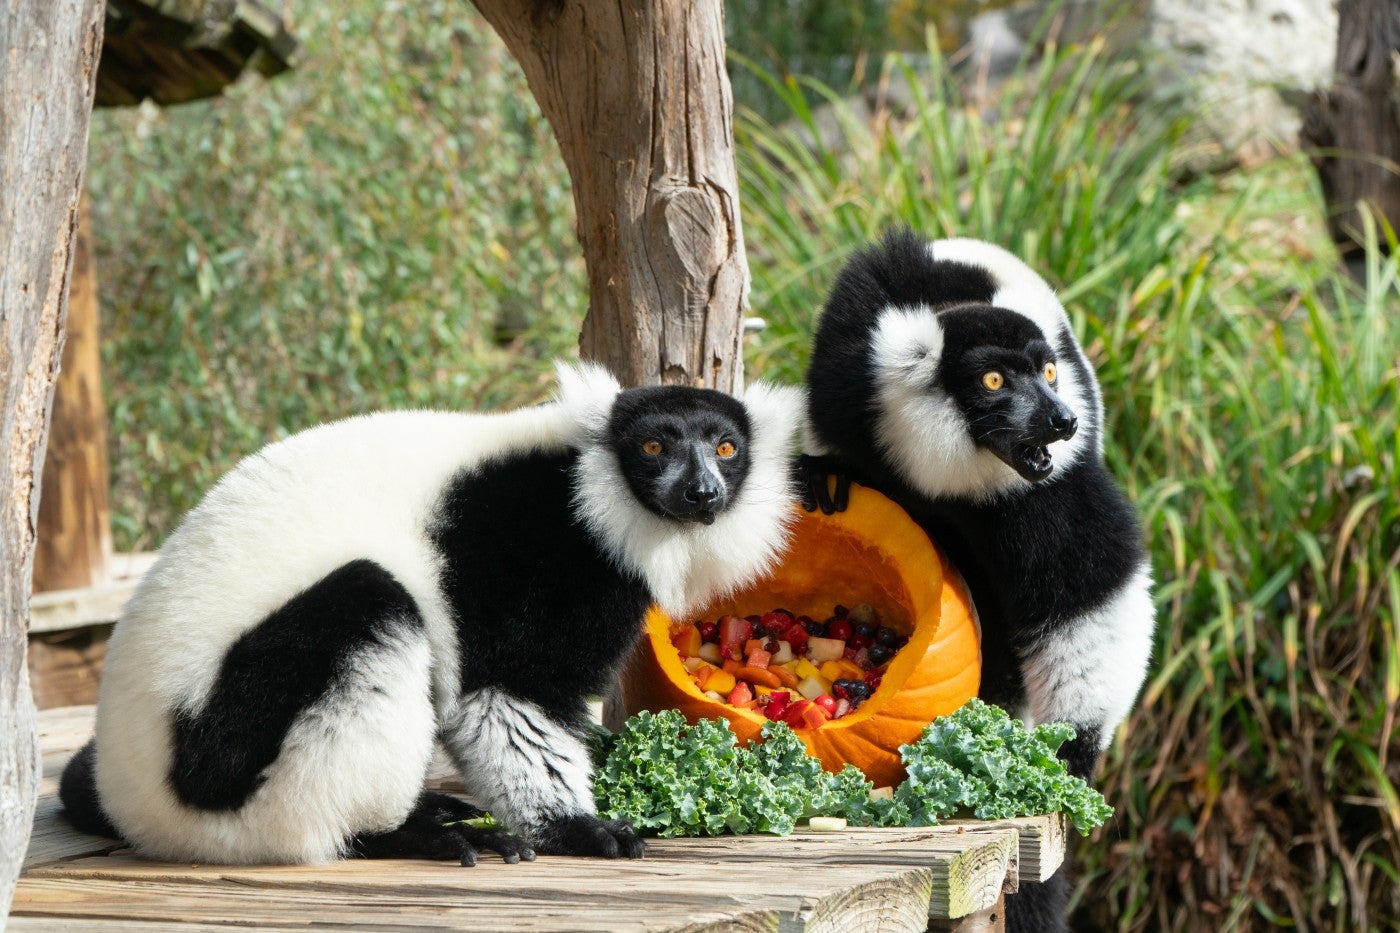 Black-and-white ruffed lemurs Aloke and Wiley claim a pumpkin filled with fruit treats as their own.